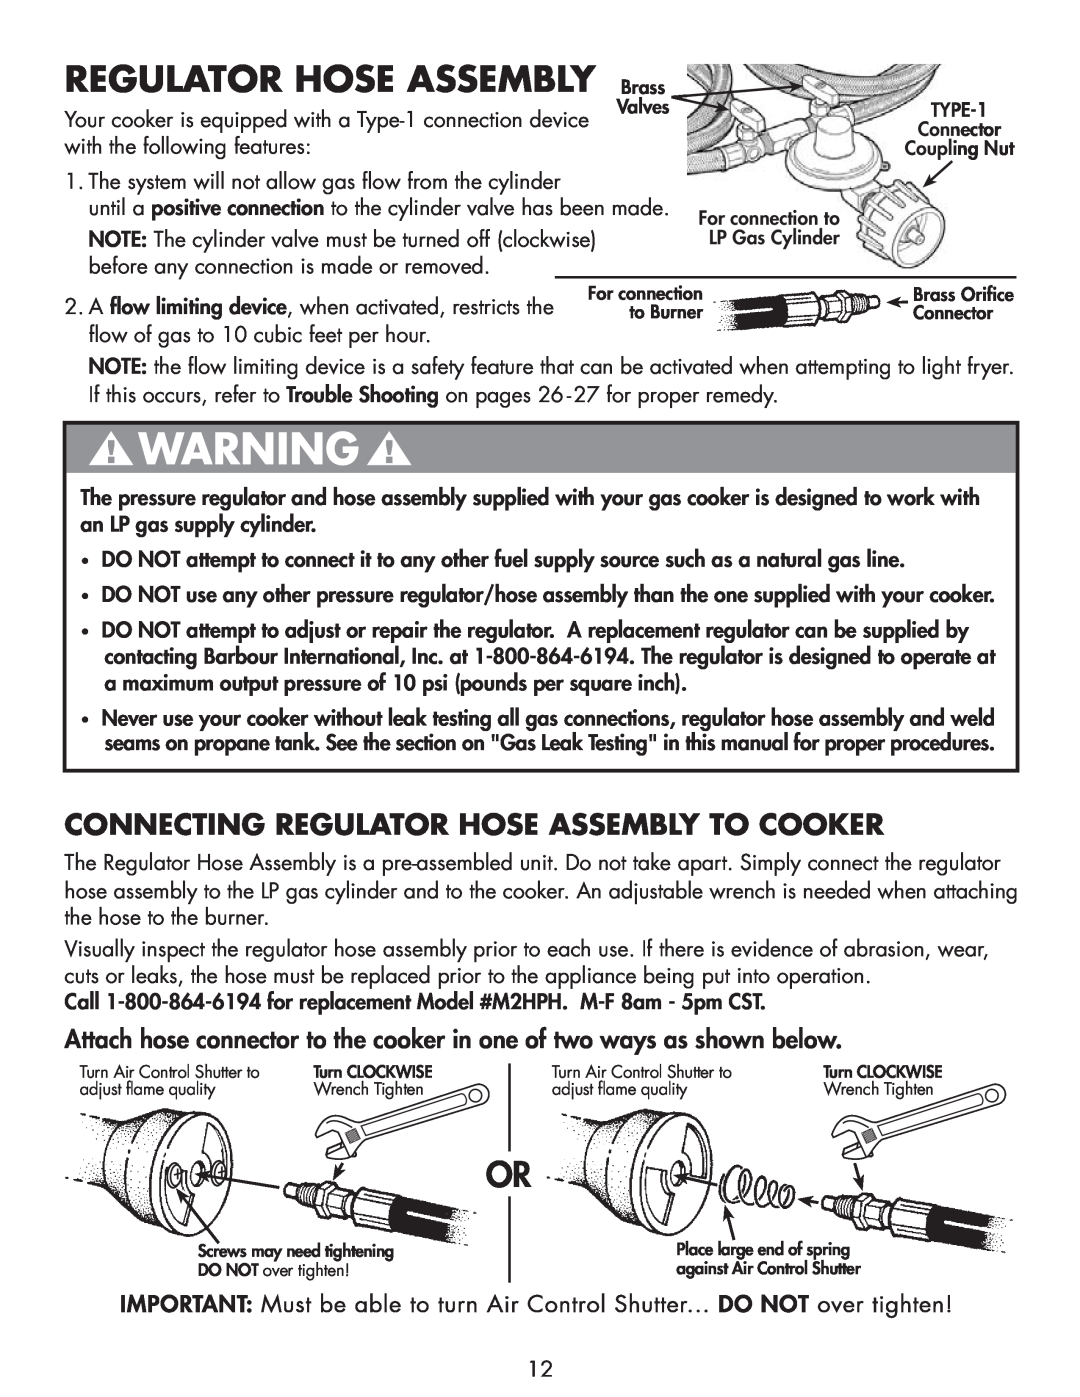 Bayou Classic DB250, DB375 owner manual REGULATOR HOSE ASSEMBLY Brass, Connecting Regulator Hose Assembly To Cooker 